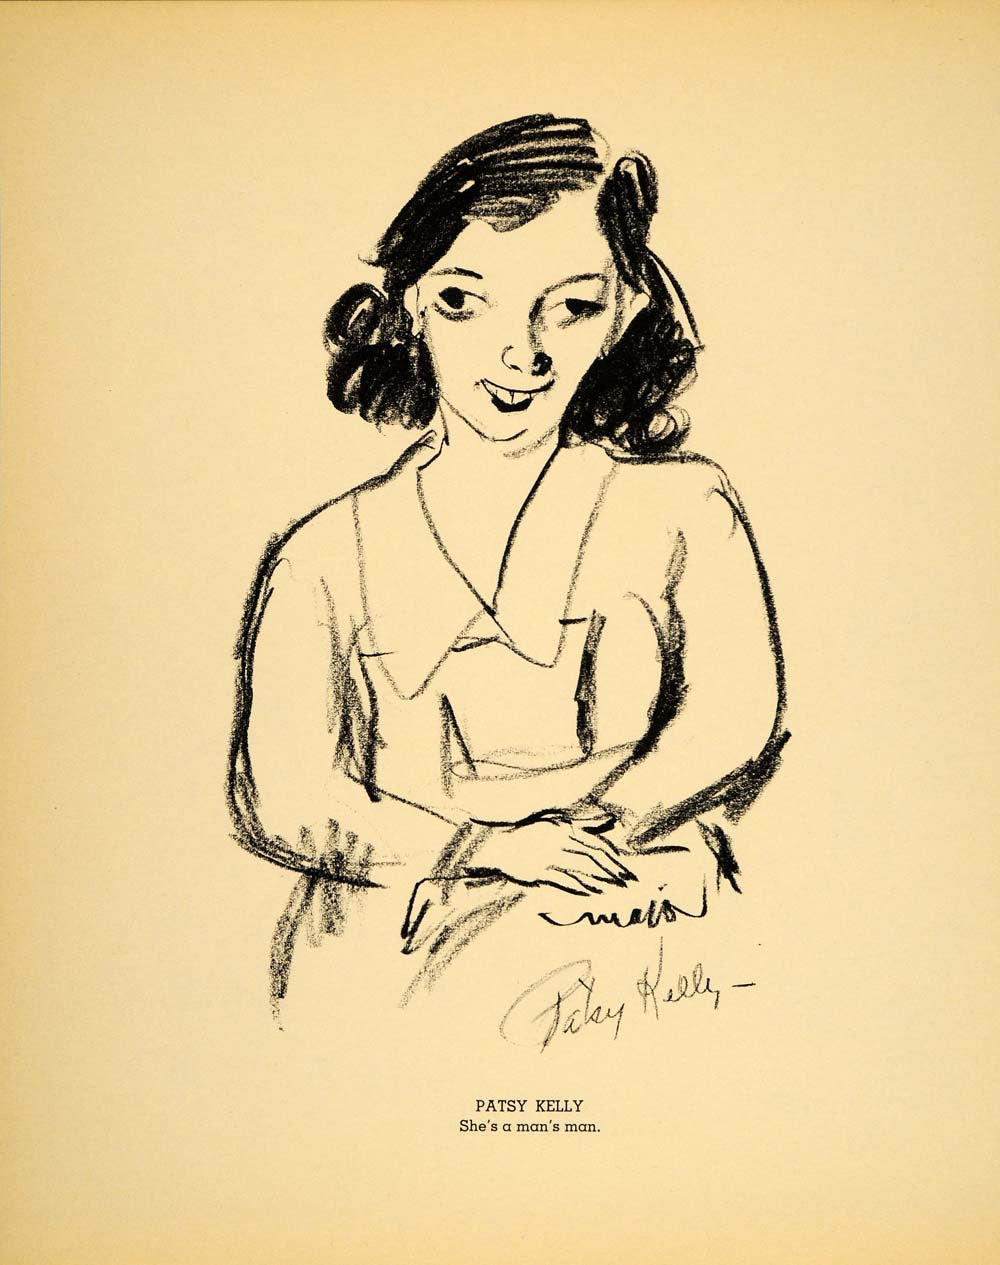 1938 Patsy Kelly Actress Henry Major Bugs Baer Litho. - ORIGINAL HOL1 - Period Paper
